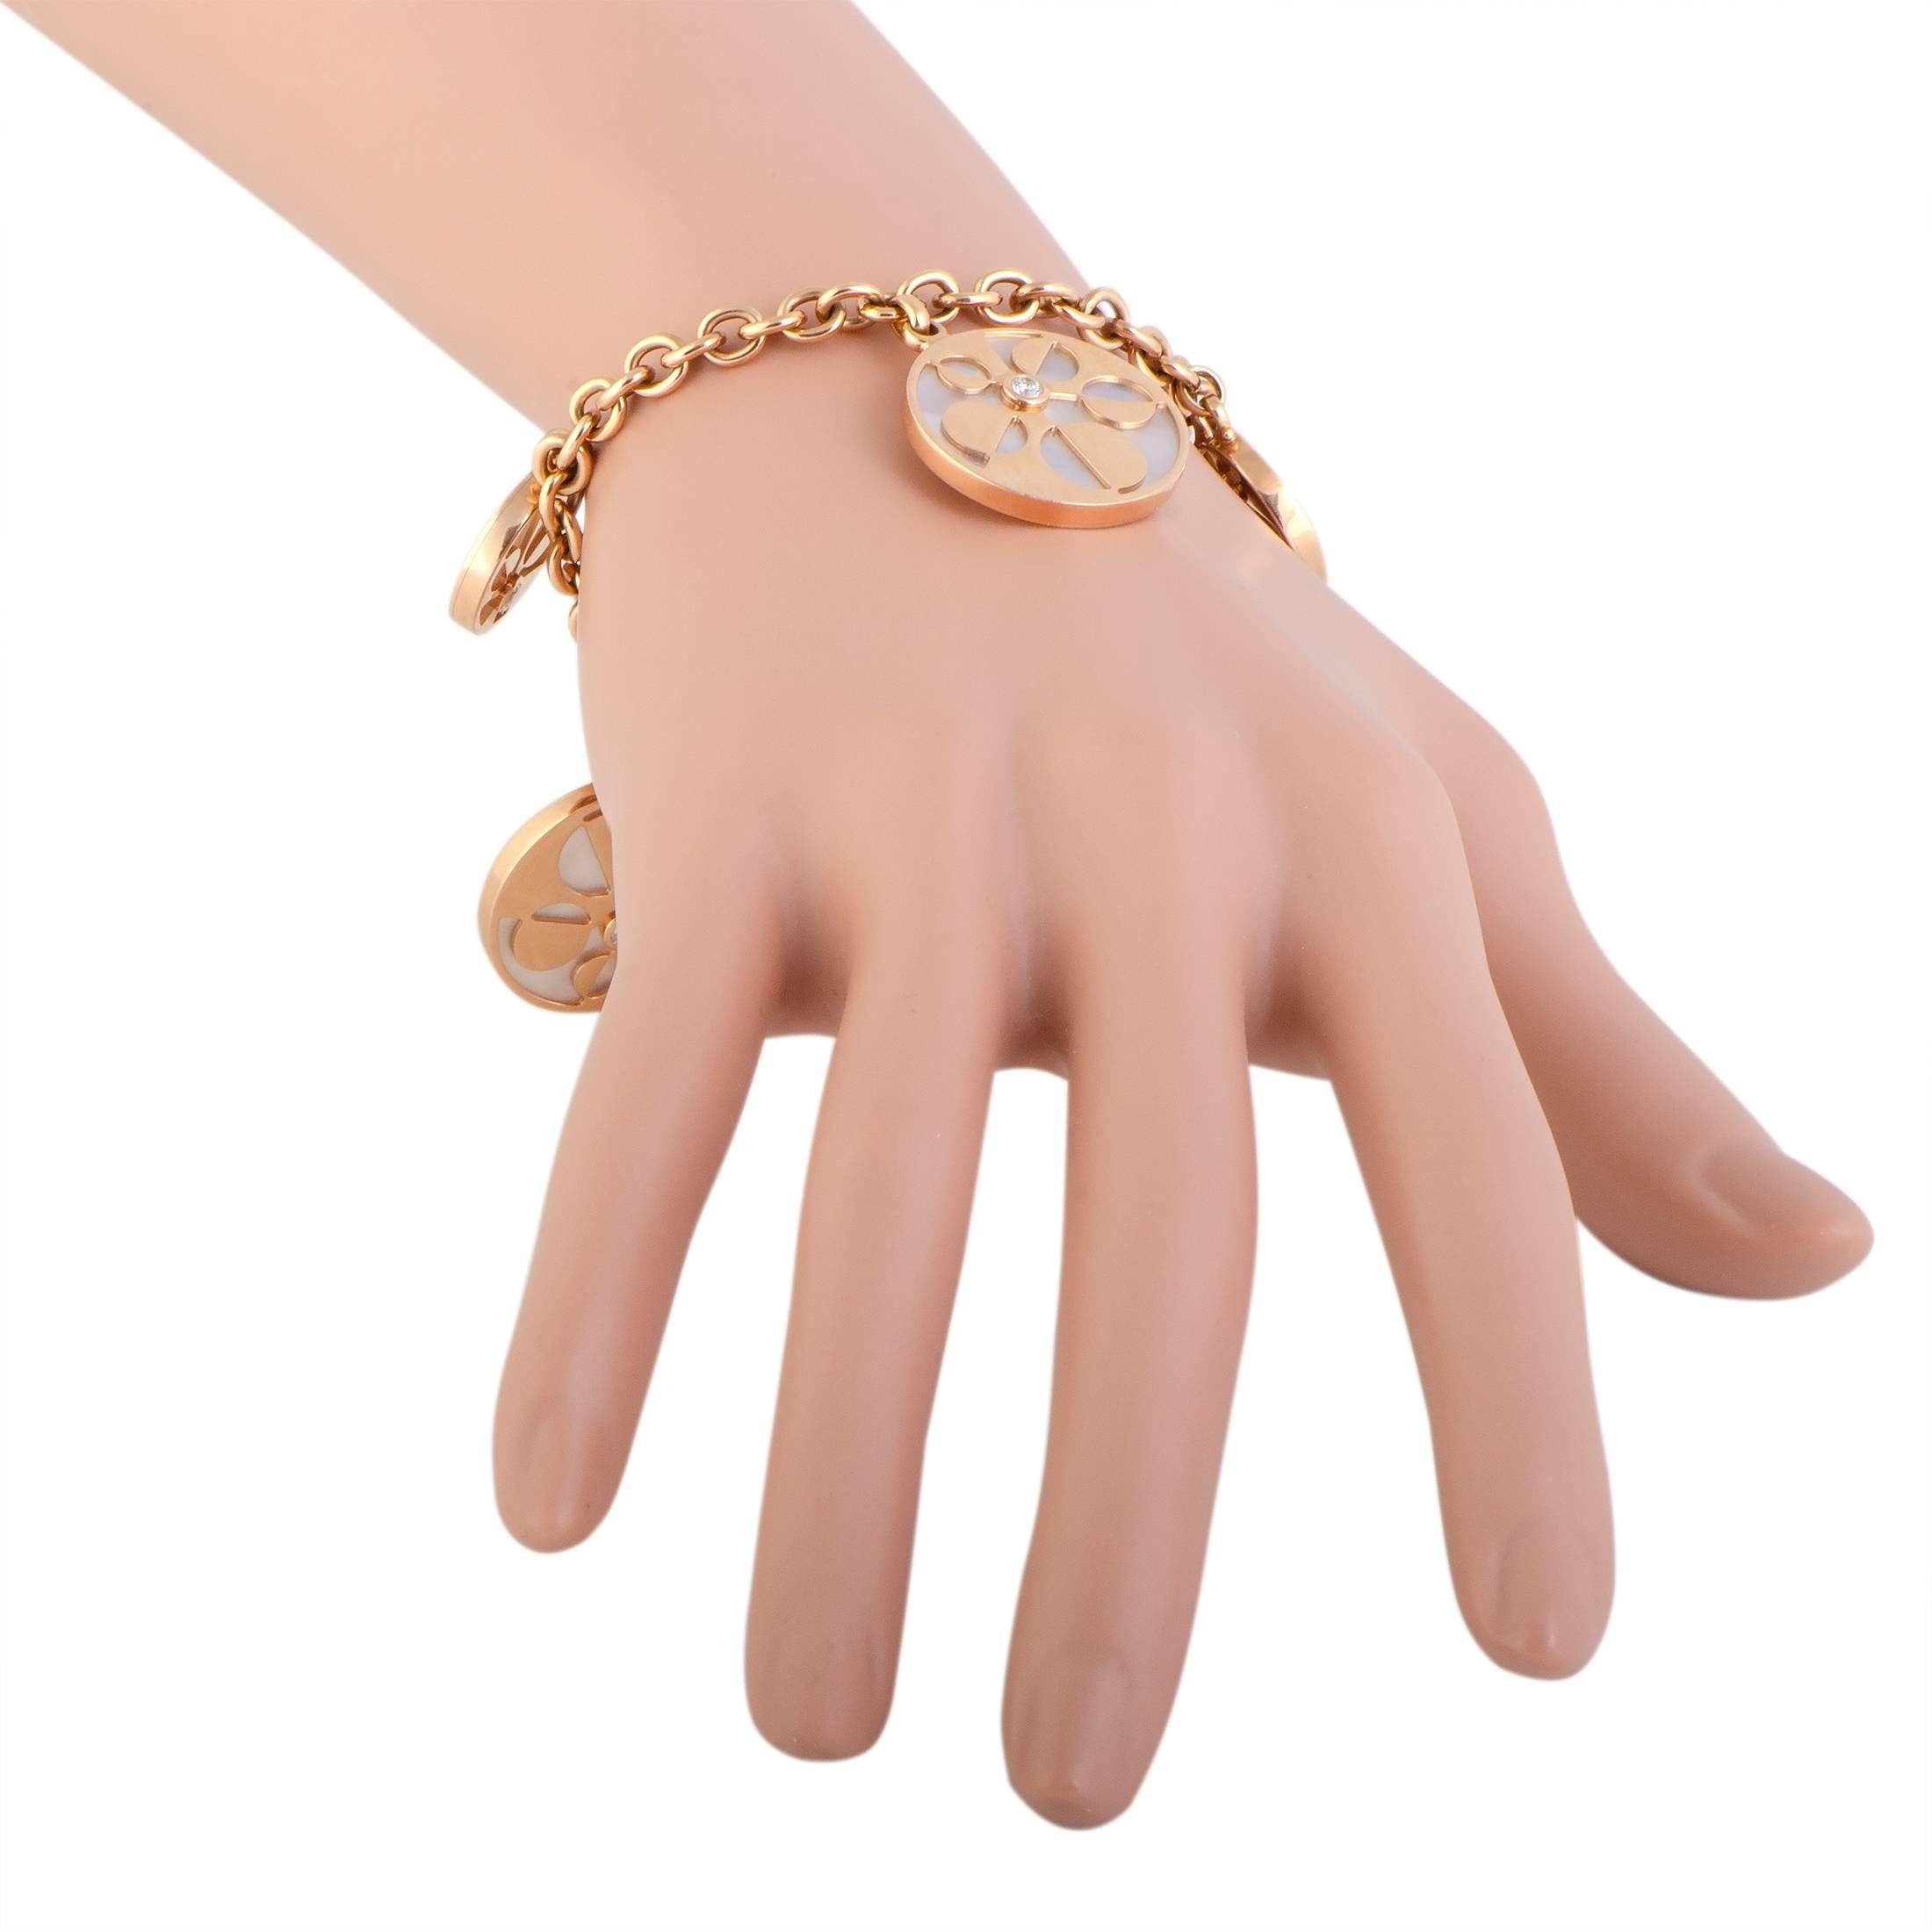 Created for the attractive “Intarsio” collection, this fashionable bracelet compels with its offbeat design and exceptional craftsmanship quality. The bracelet is presented by the renowned Italian jeweler Bvlgari, and it is beautifully made of